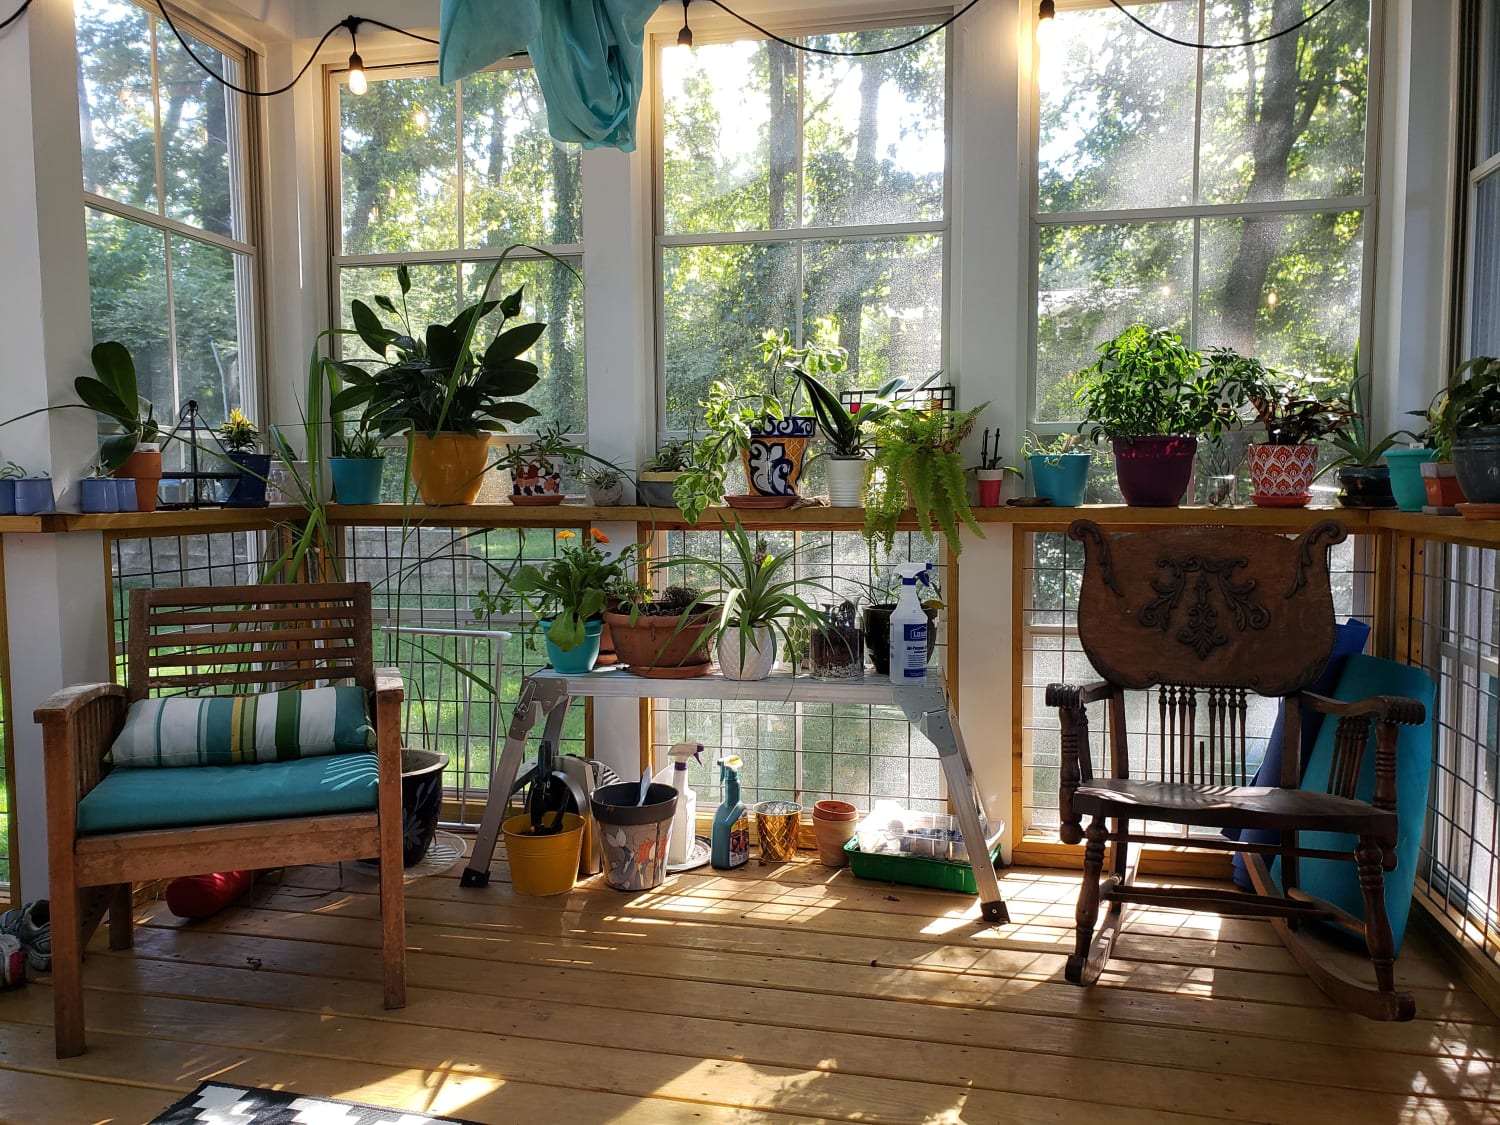 Sunroom on a pretty day -- but I'm always interested in suggestions to make it more cozy since my only idea is plants. Thanks!